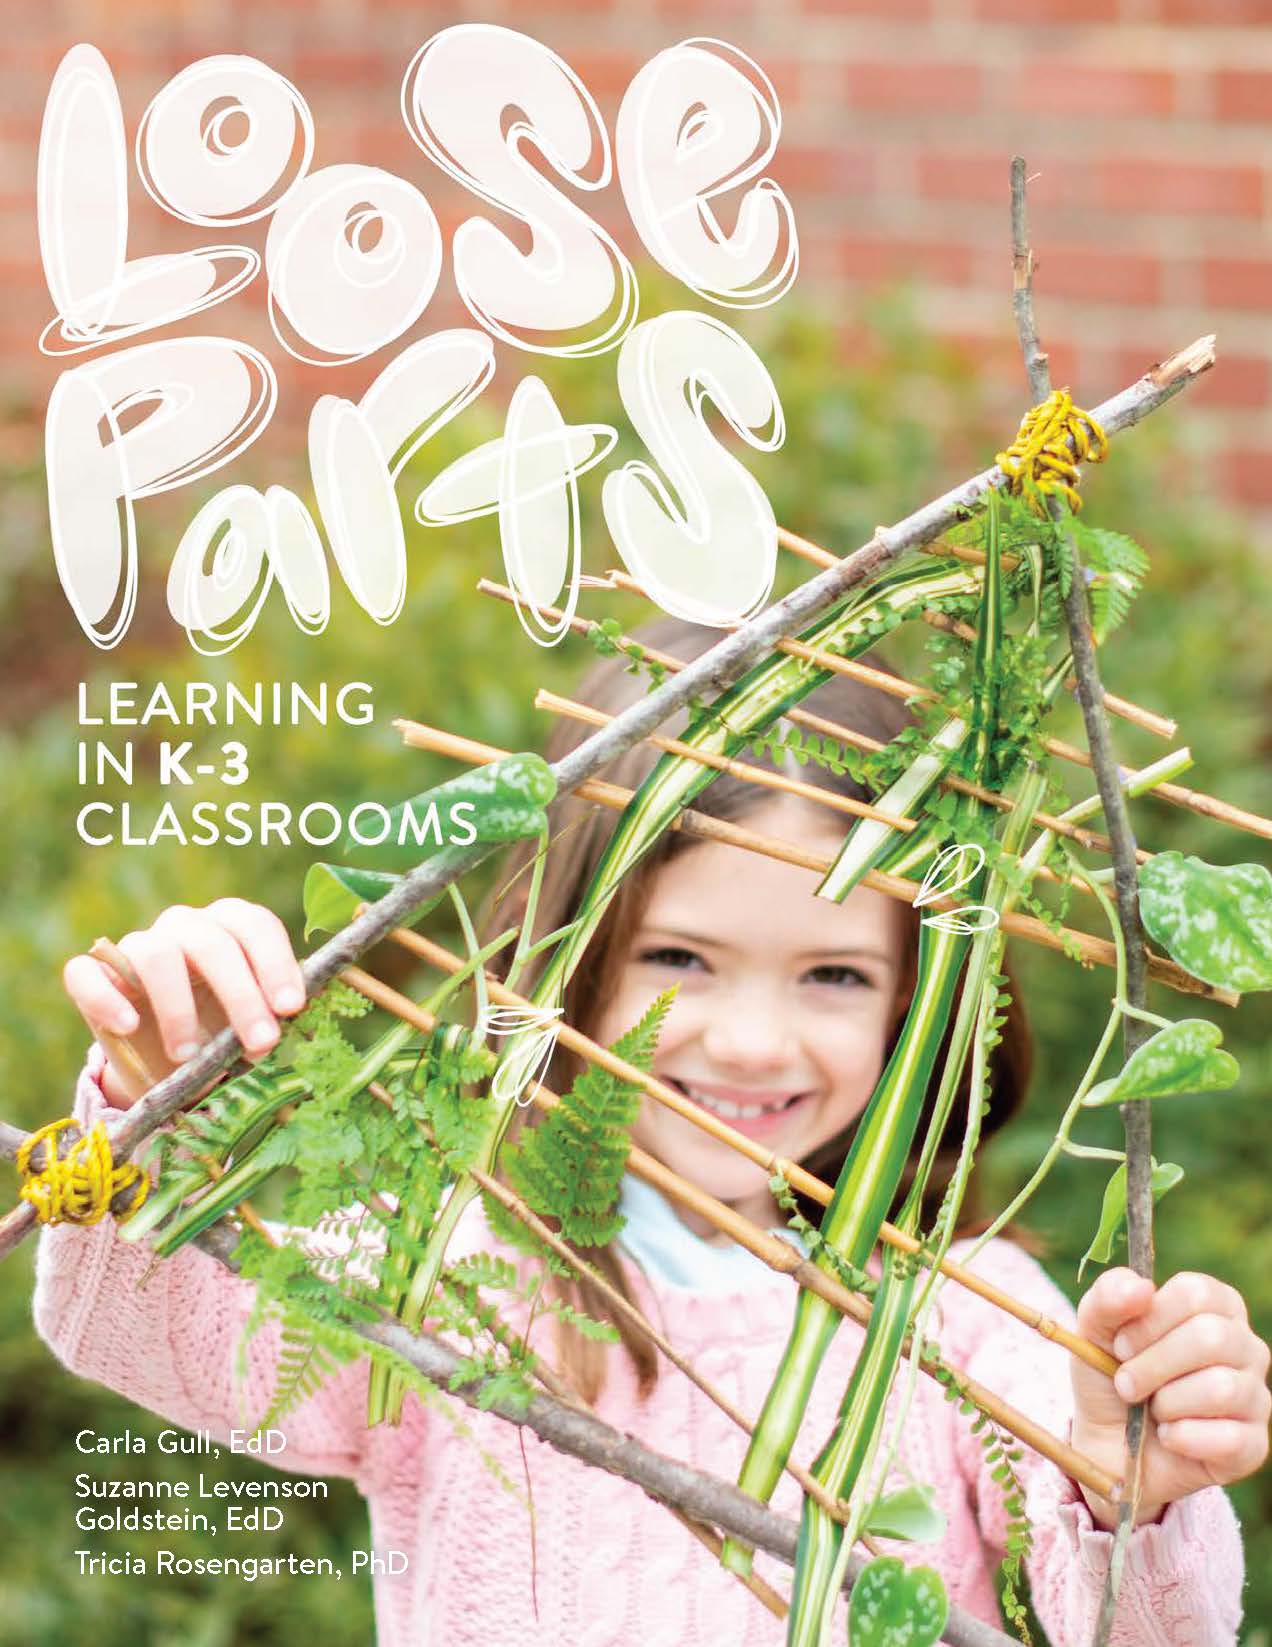 15984_LoosePartsLearningInK-3Classrooms_COVER